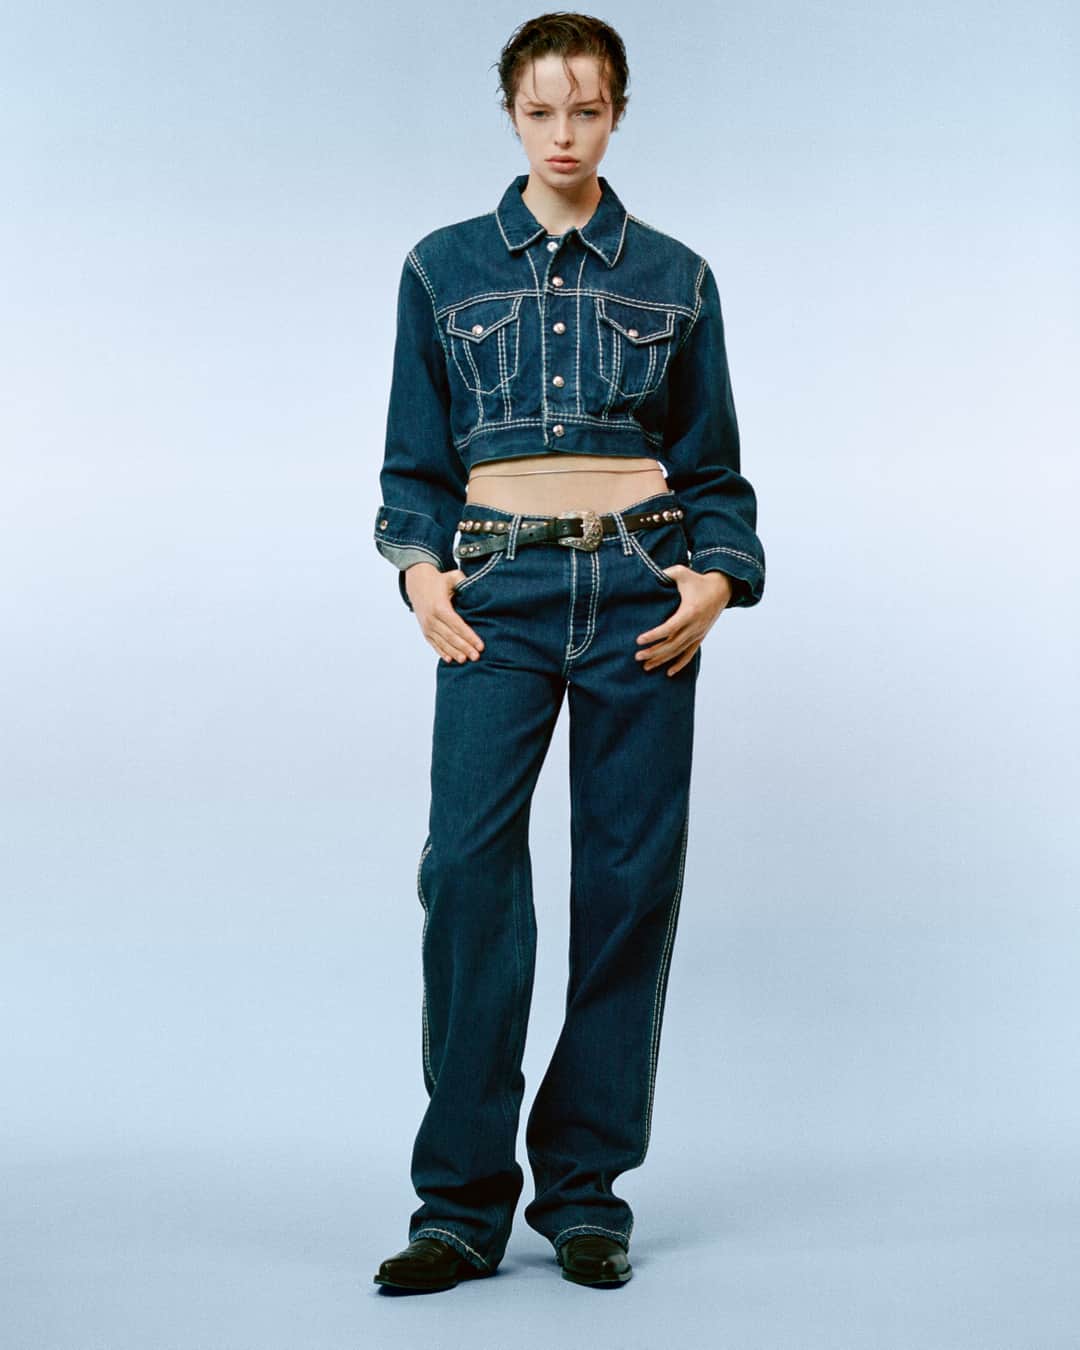 RE/DONEのインスタグラム：「The Loose Long and Cropped Denim Trucker updated for Summer with chunky white stitching #glit ⠀⠀⠀⠀⠀⠀⠀⠀⠀ ⠀⠀⠀⠀⠀⠀⠀⠀⠀ Talent: @cassadyclover​​​​​​​​⠀⠀⠀⠀⠀⠀⠀⠀⠀ Photographer: @vitofernicola​​​​​​​​​​​​​​​​​​​​​​​⠀⠀⠀⠀⠀⠀⠀⠀⠀ Creative Agency: @ljbtnstudio​​​​​​​​​​​​​​​​​​​​​​​​⠀⠀⠀⠀⠀⠀⠀⠀⠀ Stylist: @lolitajacobs​​​​​​​​​​​​​​​​a​​​​​​​​⠀⠀⠀⠀⠀⠀⠀⠀⠀ Makeup: @_celinemartin_​​​​​​​​​​​​​​​​​​​​​​​​⠀⠀⠀⠀⠀⠀⠀⠀⠀ Hair stylist: @louisghewy​​​​​​​​⠀⠀⠀⠀⠀⠀⠀⠀⠀ Set designer: @nico.lall​​​​​​​​⠀⠀⠀⠀⠀⠀⠀⠀⠀ Production: @arthuretphilippine」